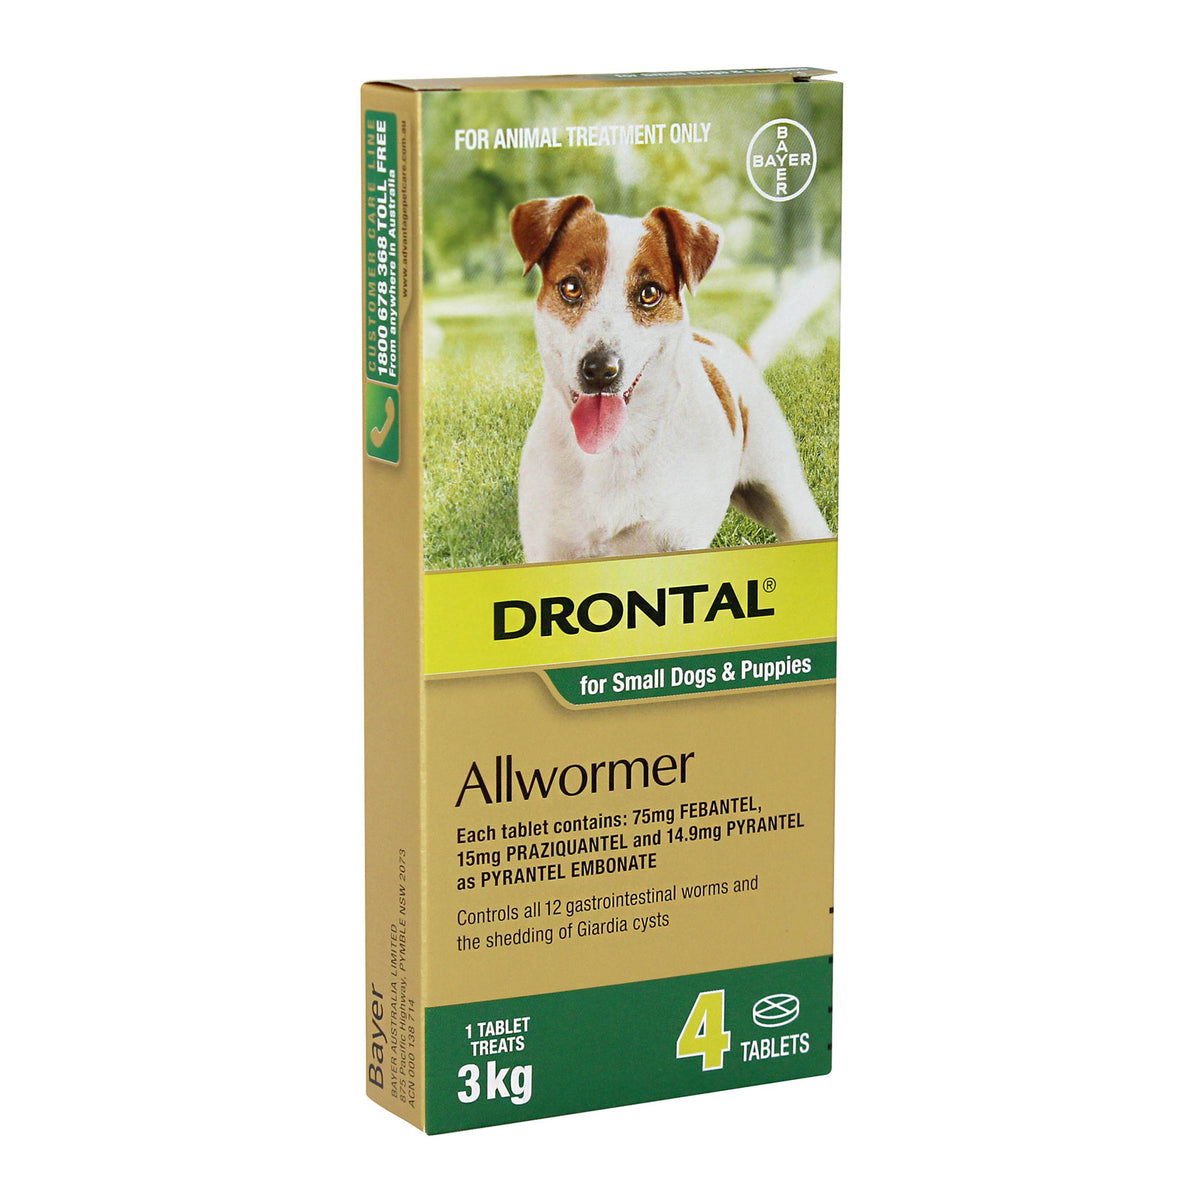 Drontal Allwormer Tablets for Small Dogs and Puppies 4 tabs